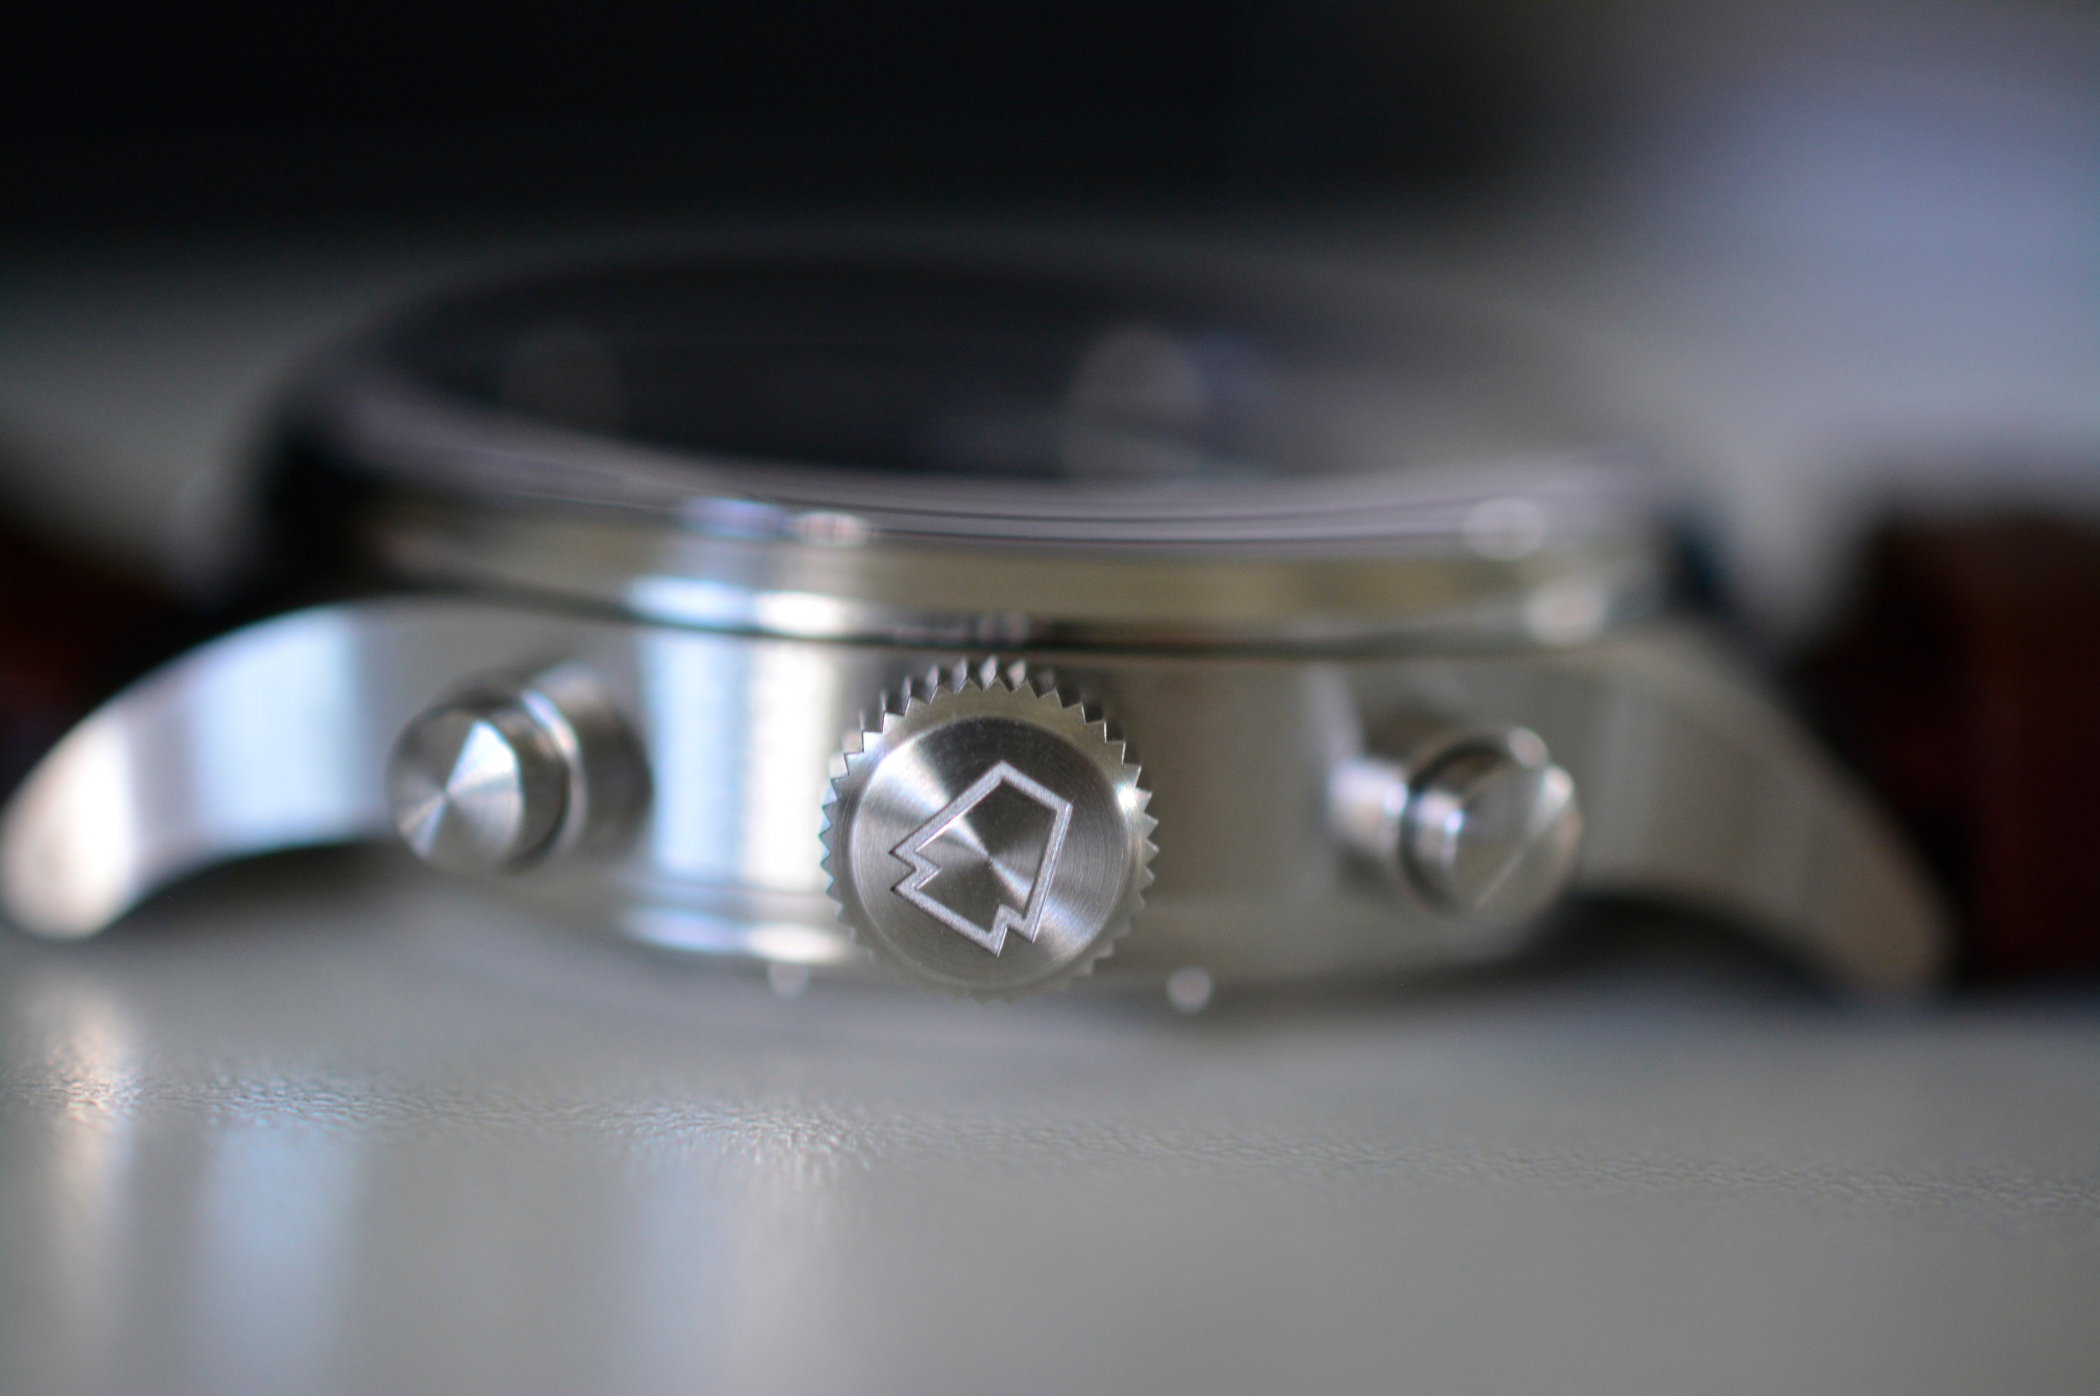 Crown and pushers for the RGM Model 600 Chronograph